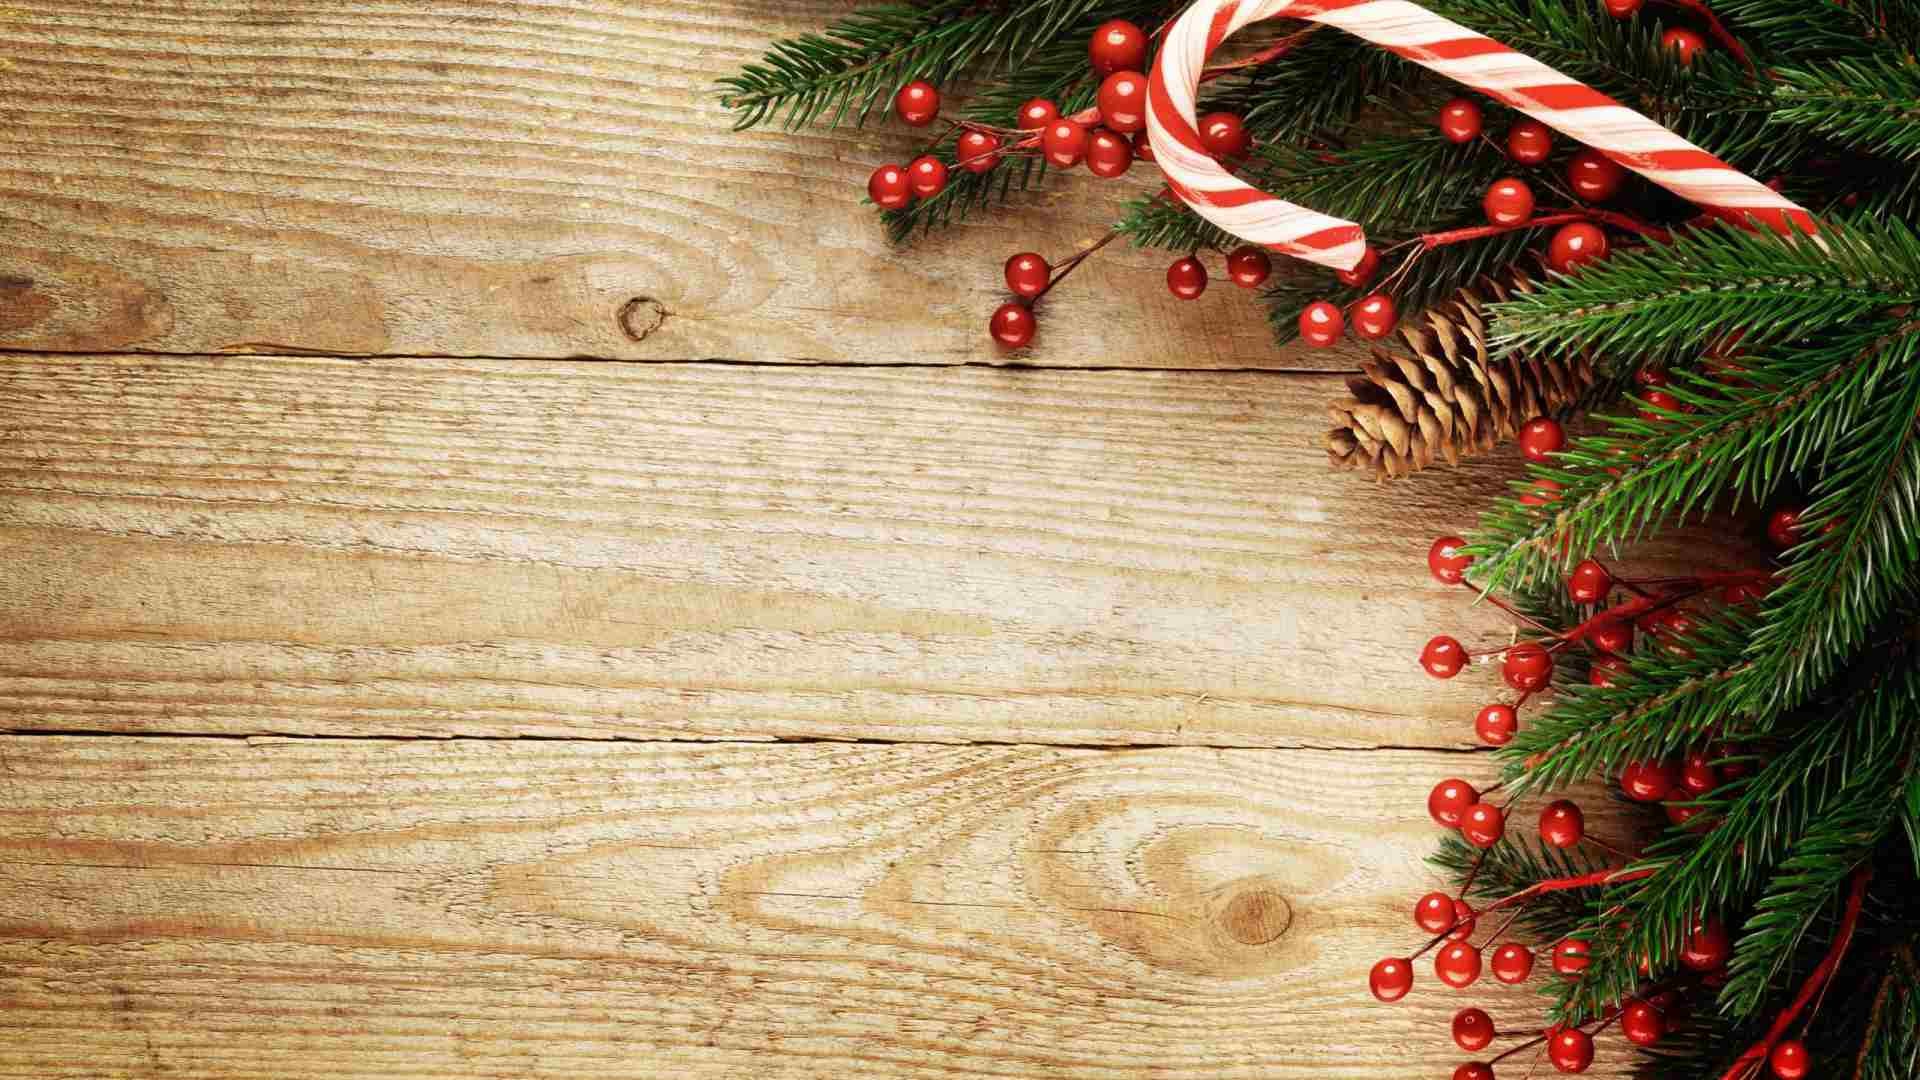 1920x1080 Christmas Decorations from WallpaperStock